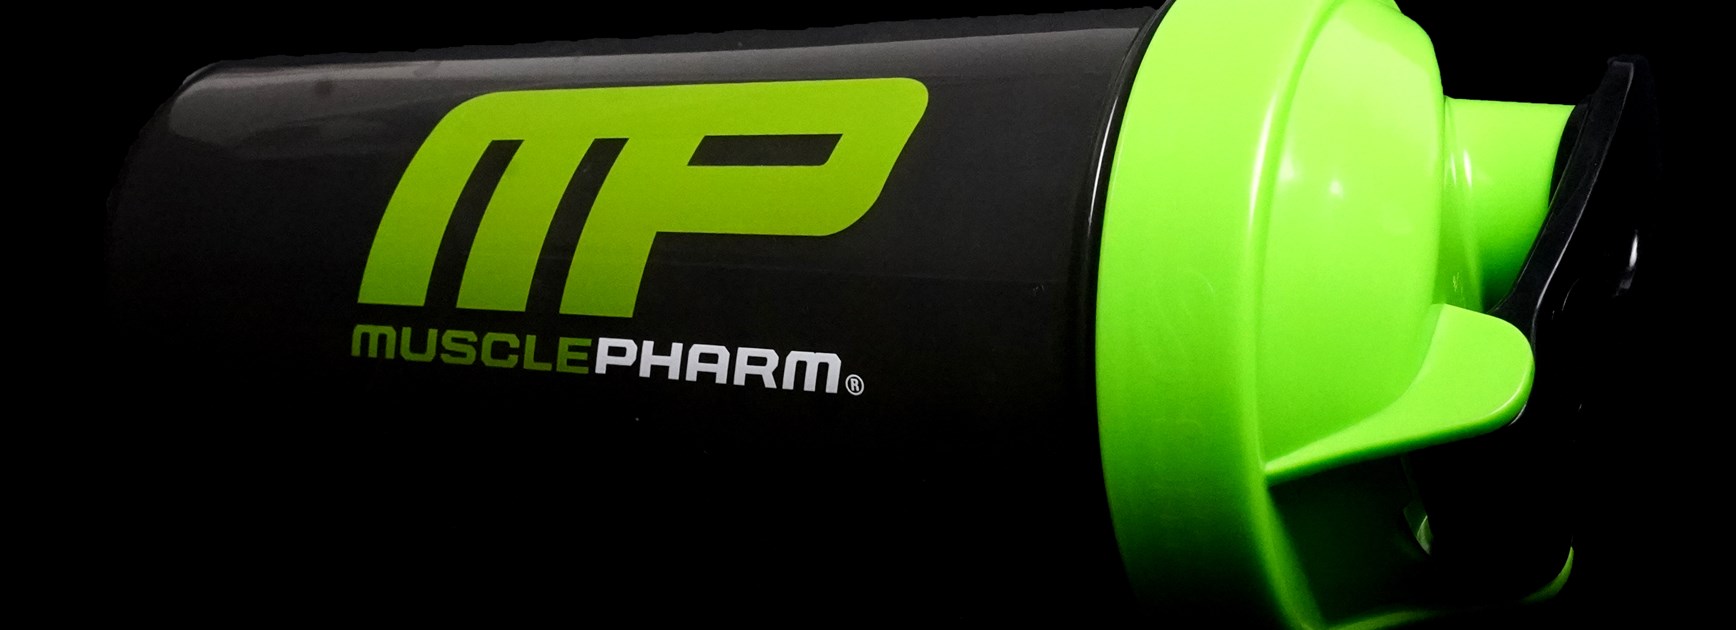 MusclePharm joins Knights in 2020